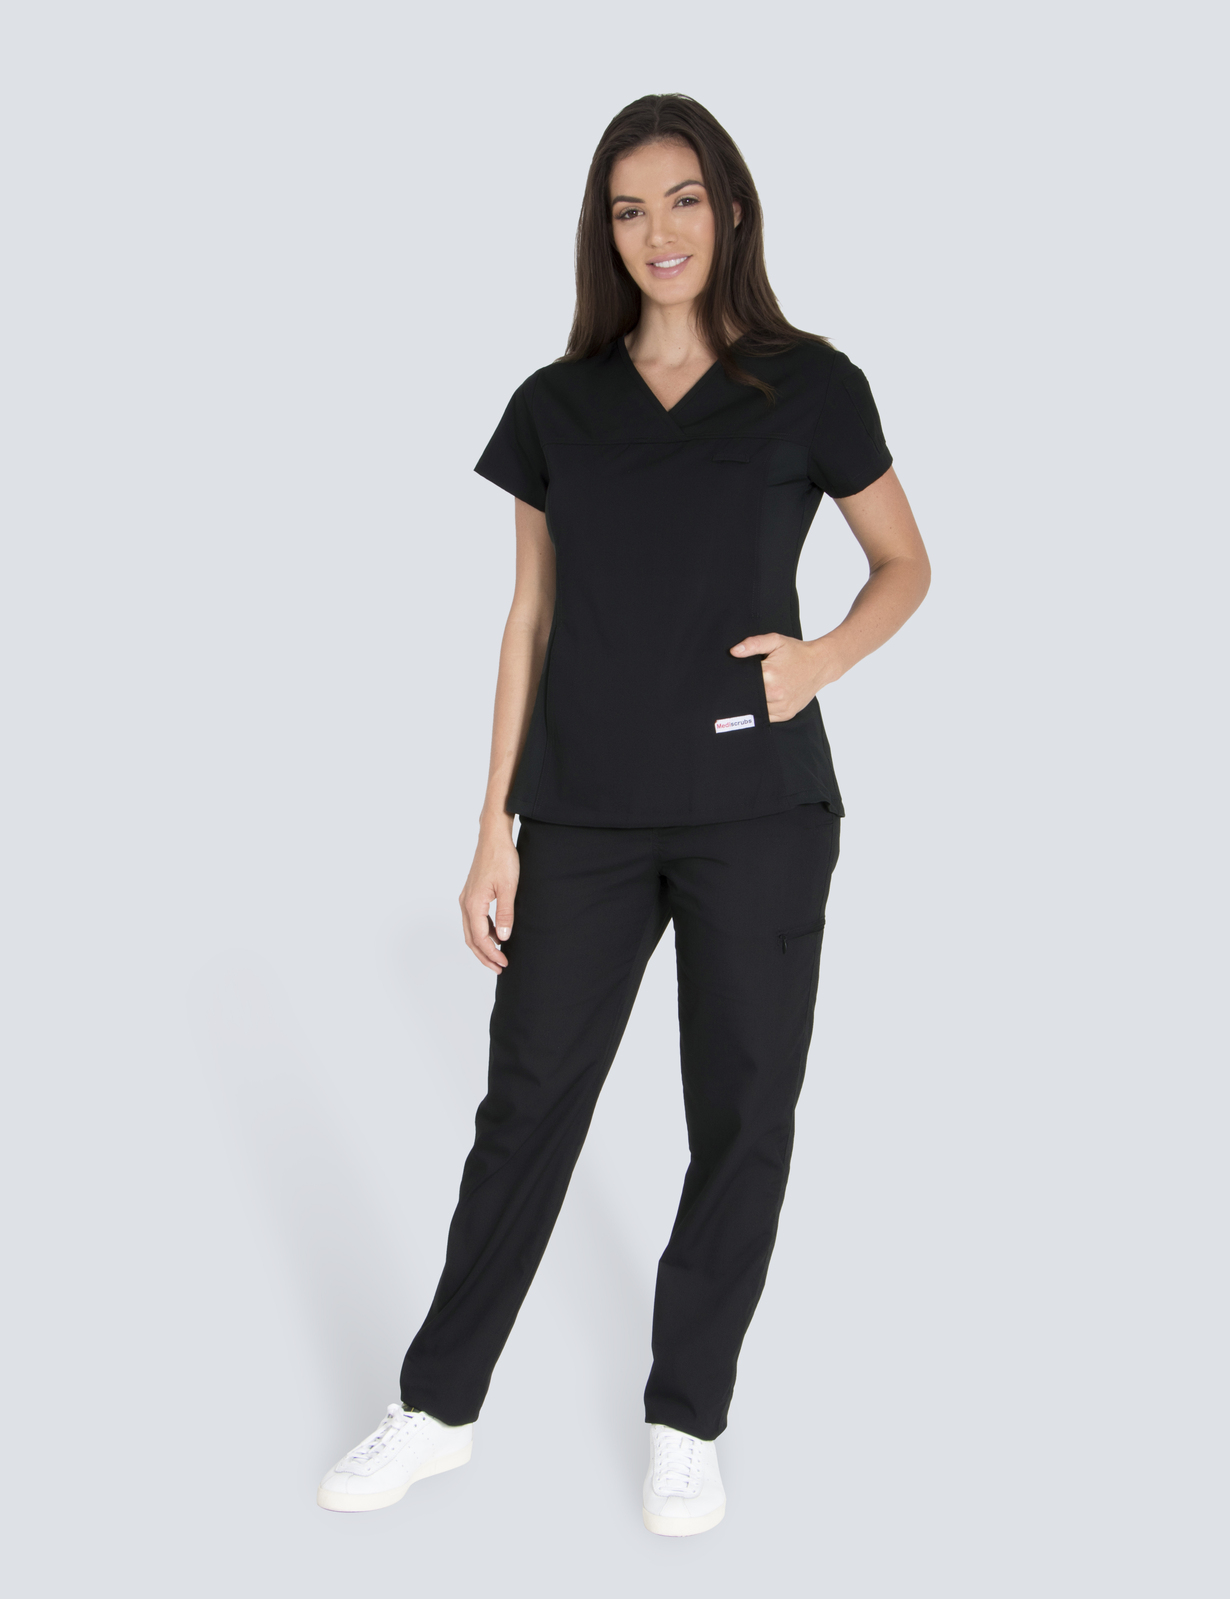 Canberra Hospital Medical Imaging Radiographer  Uniform Set Bundle (Wome'ns Fit Spandex Top and Cargo Pants in Royal + Logos)